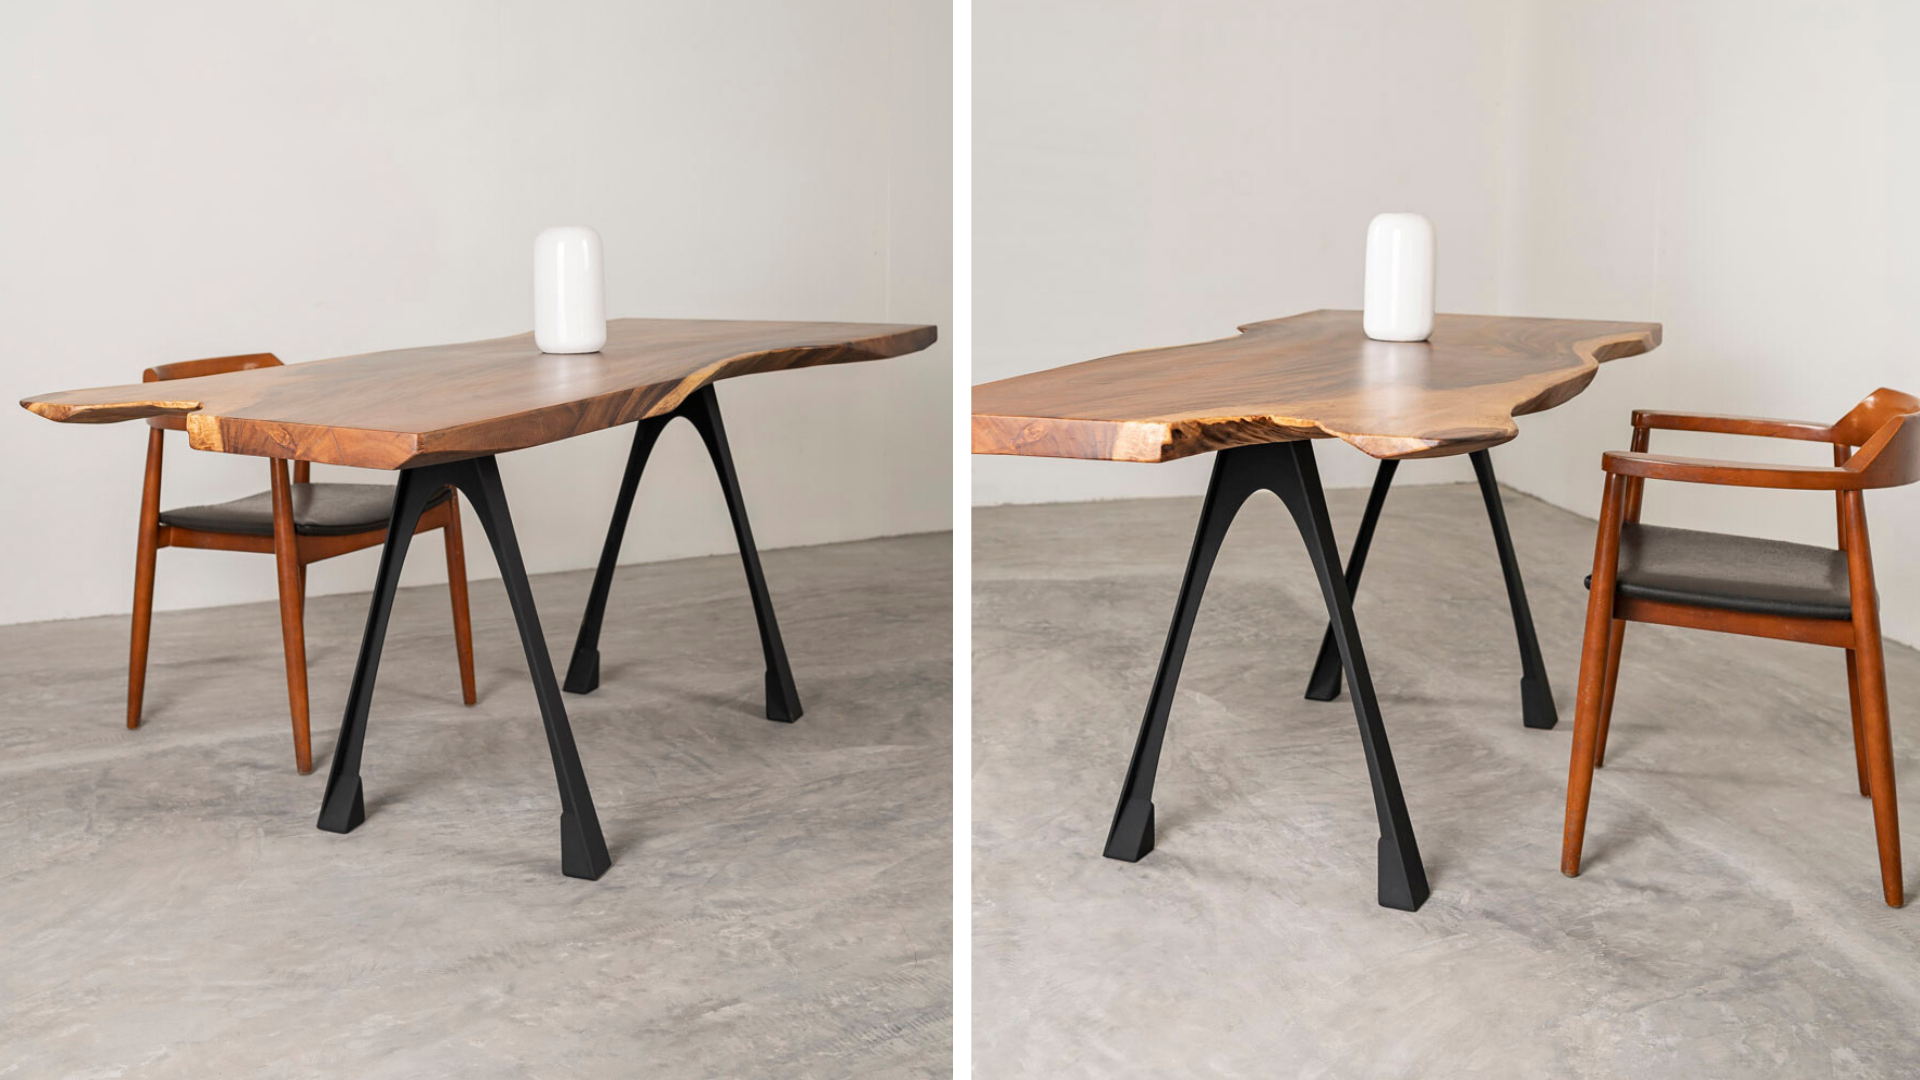 Arlo metal table legs have a rustic and organic design that resembles a tree branch.